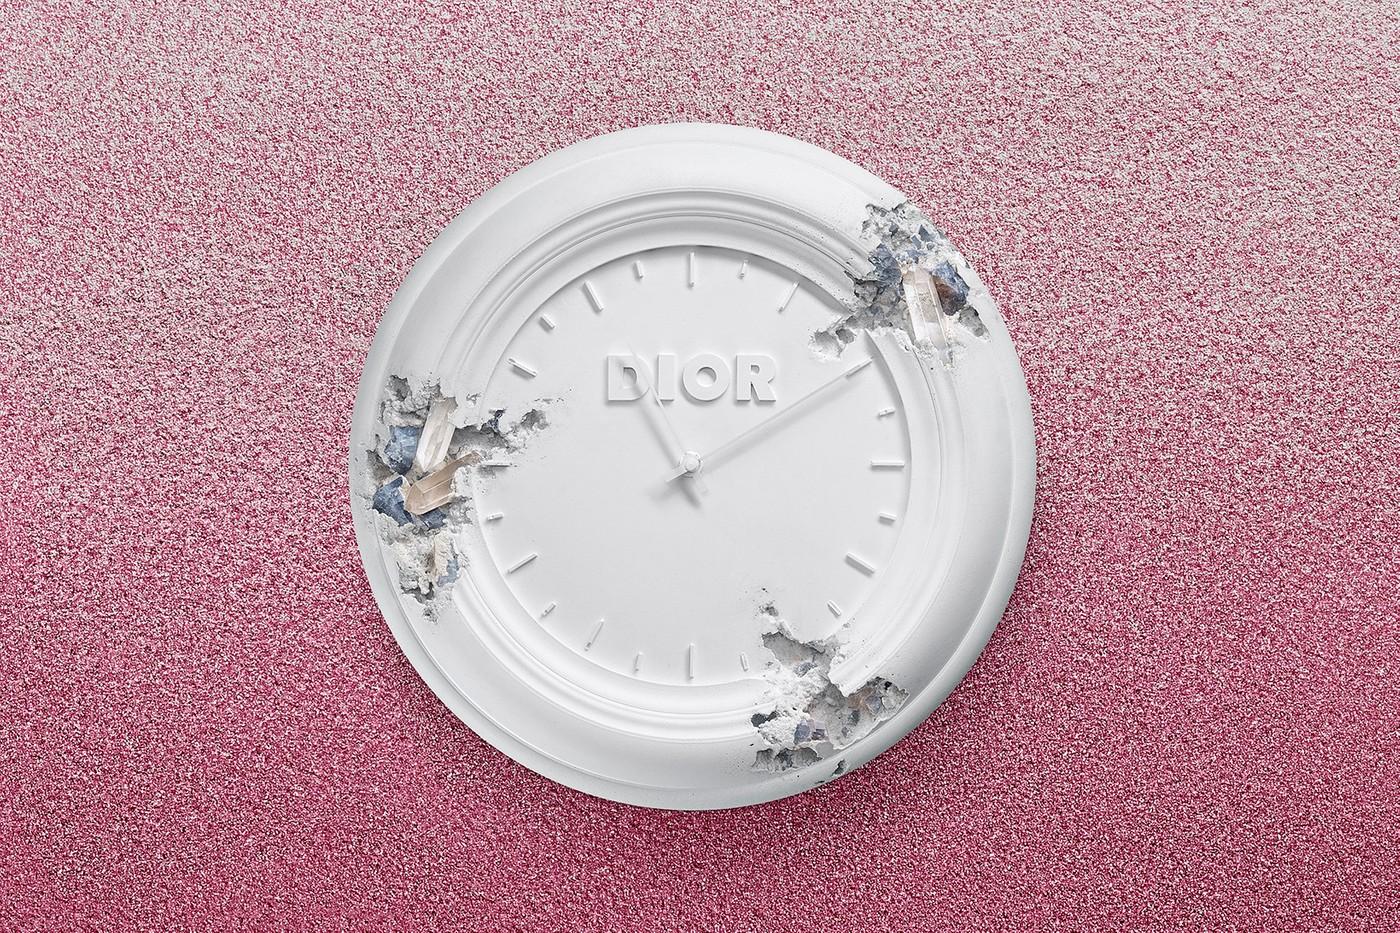 Summer 2020 Men’s show, Daniel Arsham has transformed Christian Dior’s atelier clock into a functional sculpture. 
Eroded in several places as if ravaged by time, this veritable work of art emblazoned with the Dior signature reveals cracks pierced